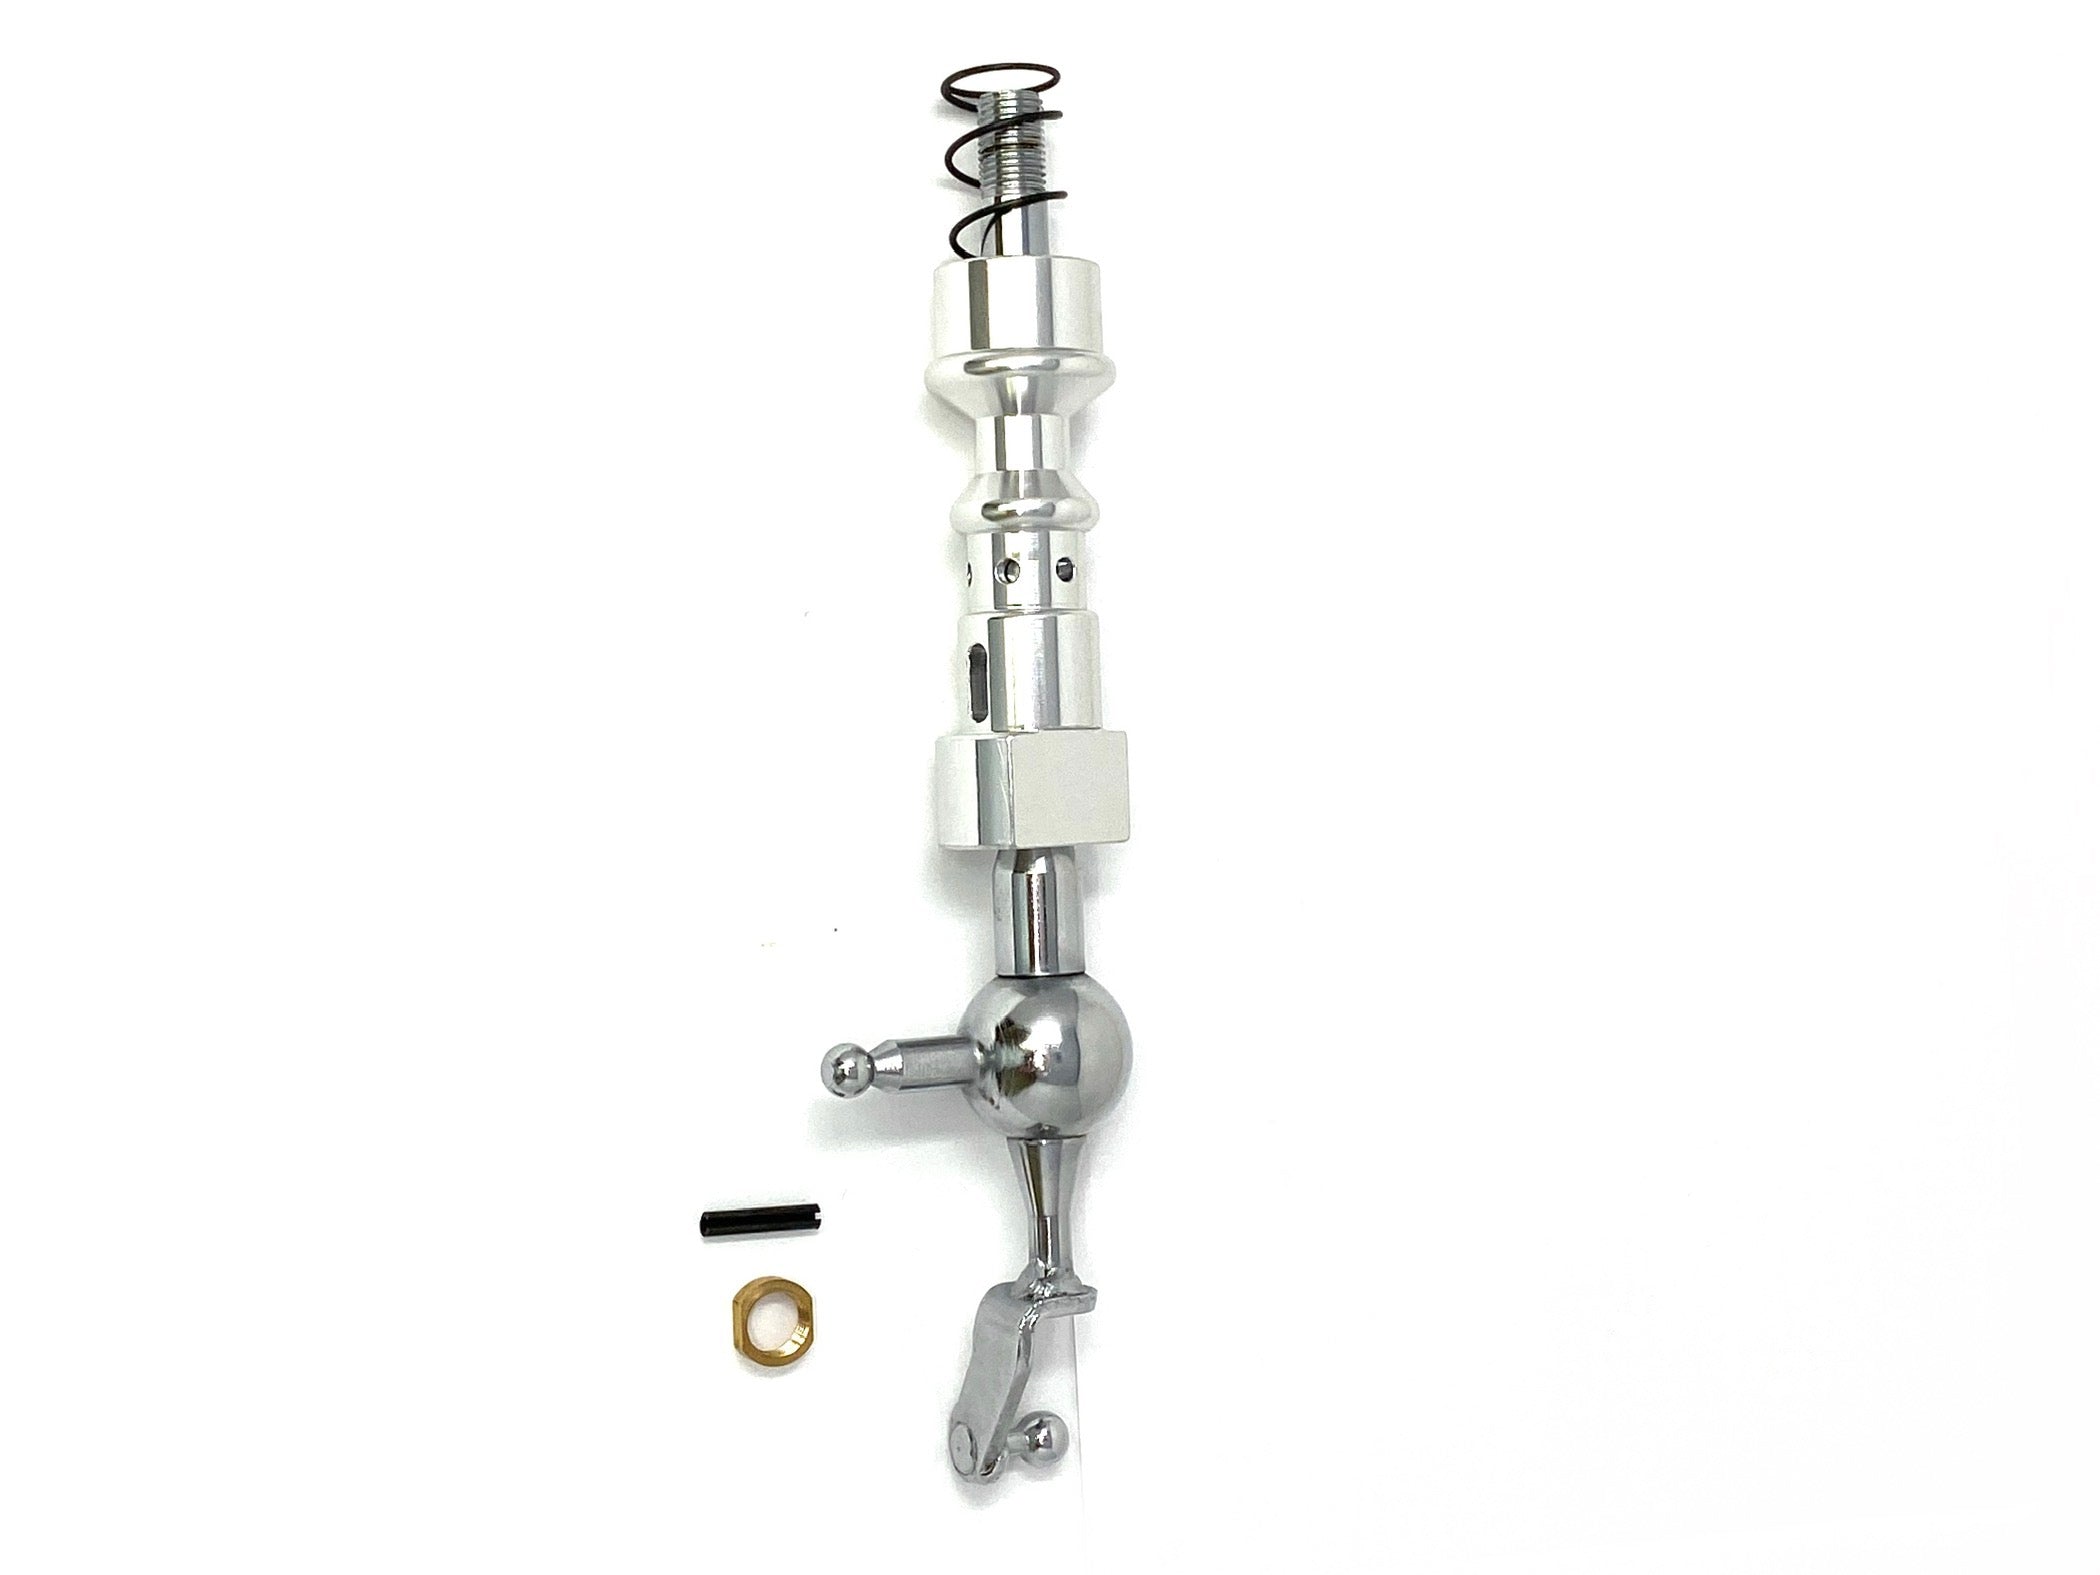 Short Shifter for Ford Focus 2000